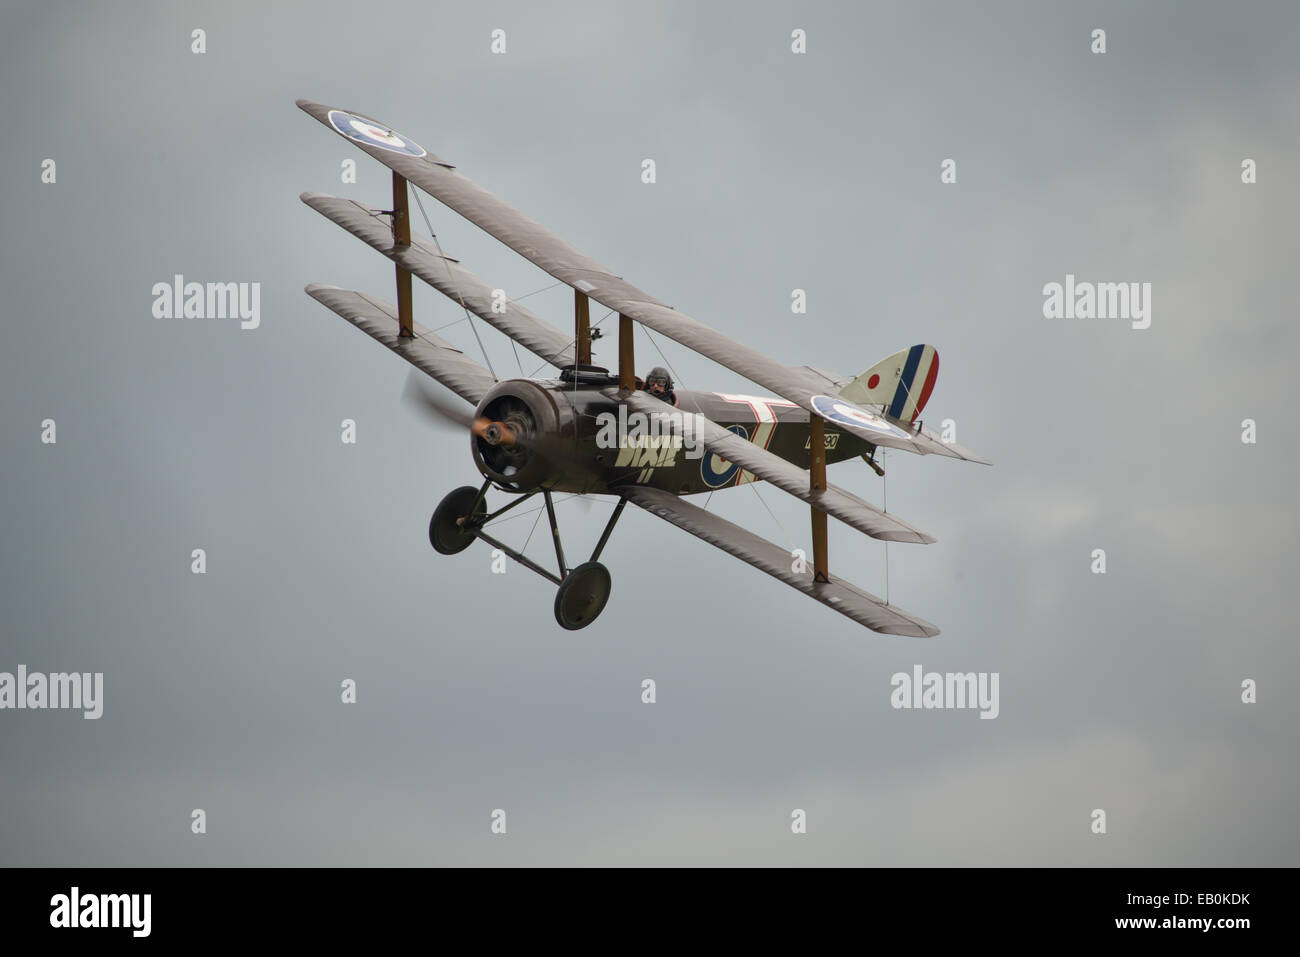 Biggleswade, UK - 29 June 2014: A vintage 1916 British Sopwith Triplane on display at the Shuttleworth Collection air show. Stock Photo